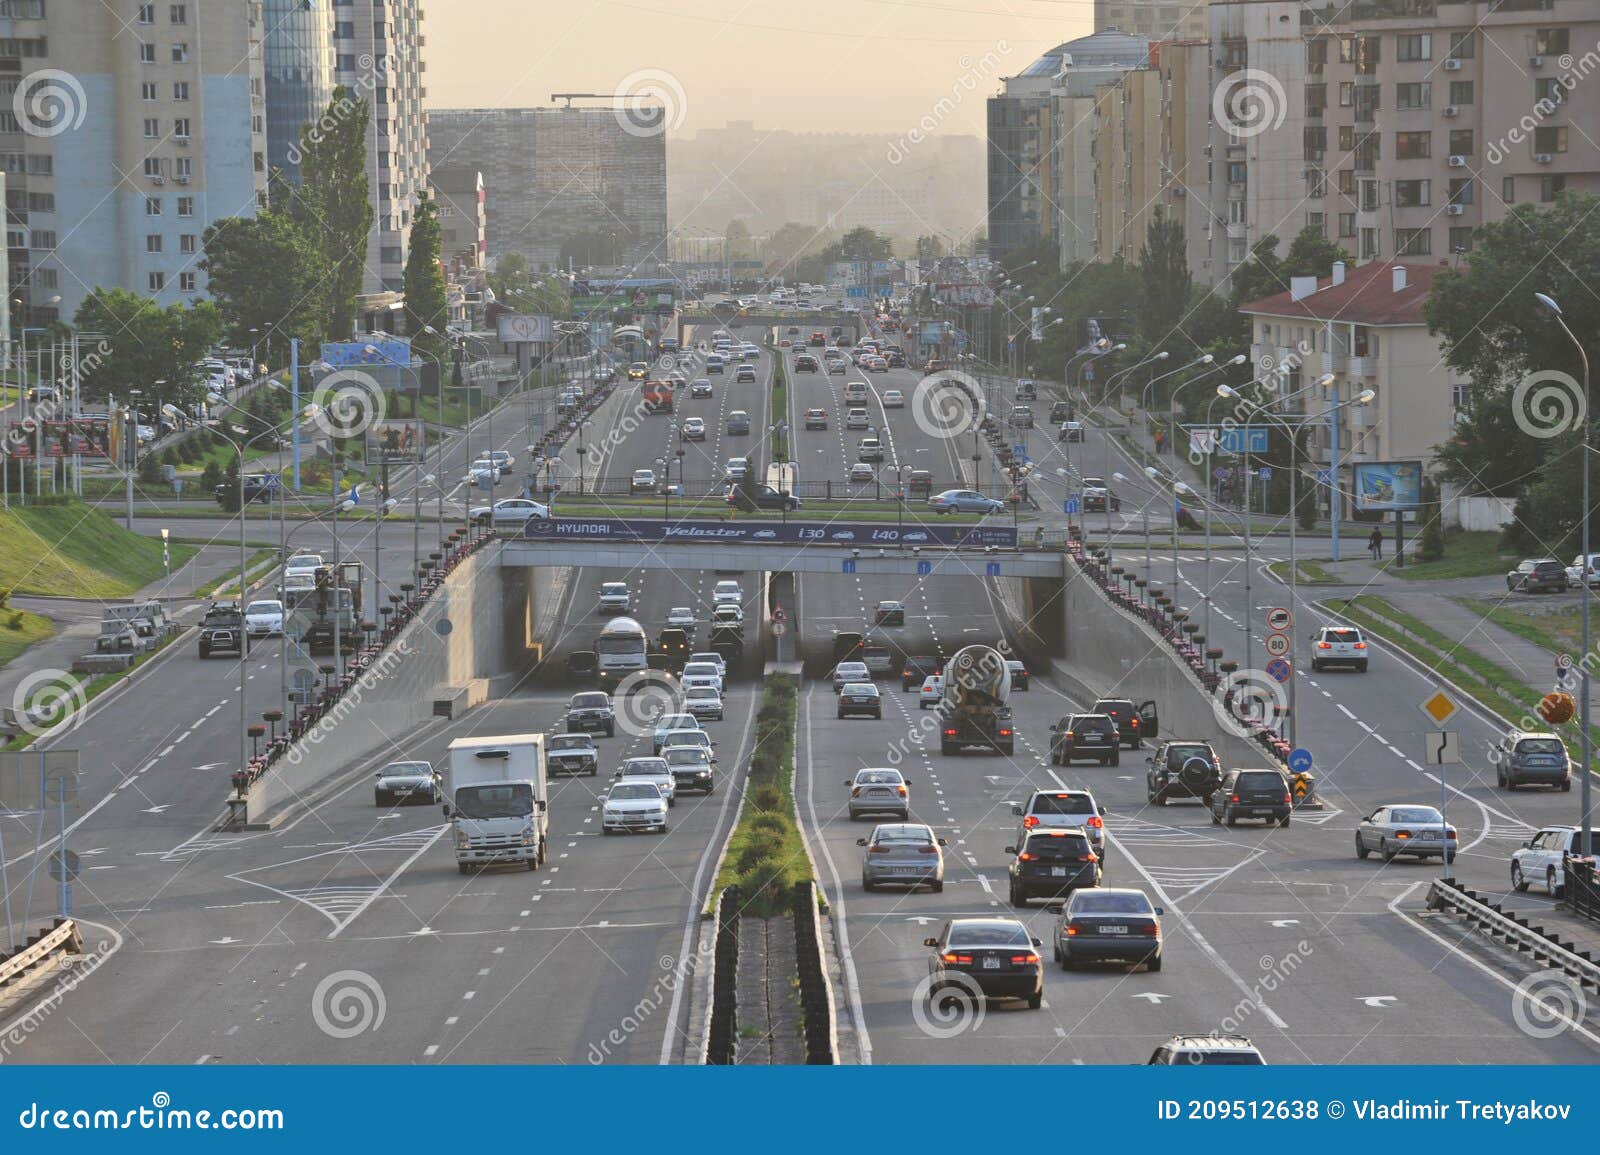 Almaty, Kazakhstan - 05.30.2013 : Traffic on One of the Central ...